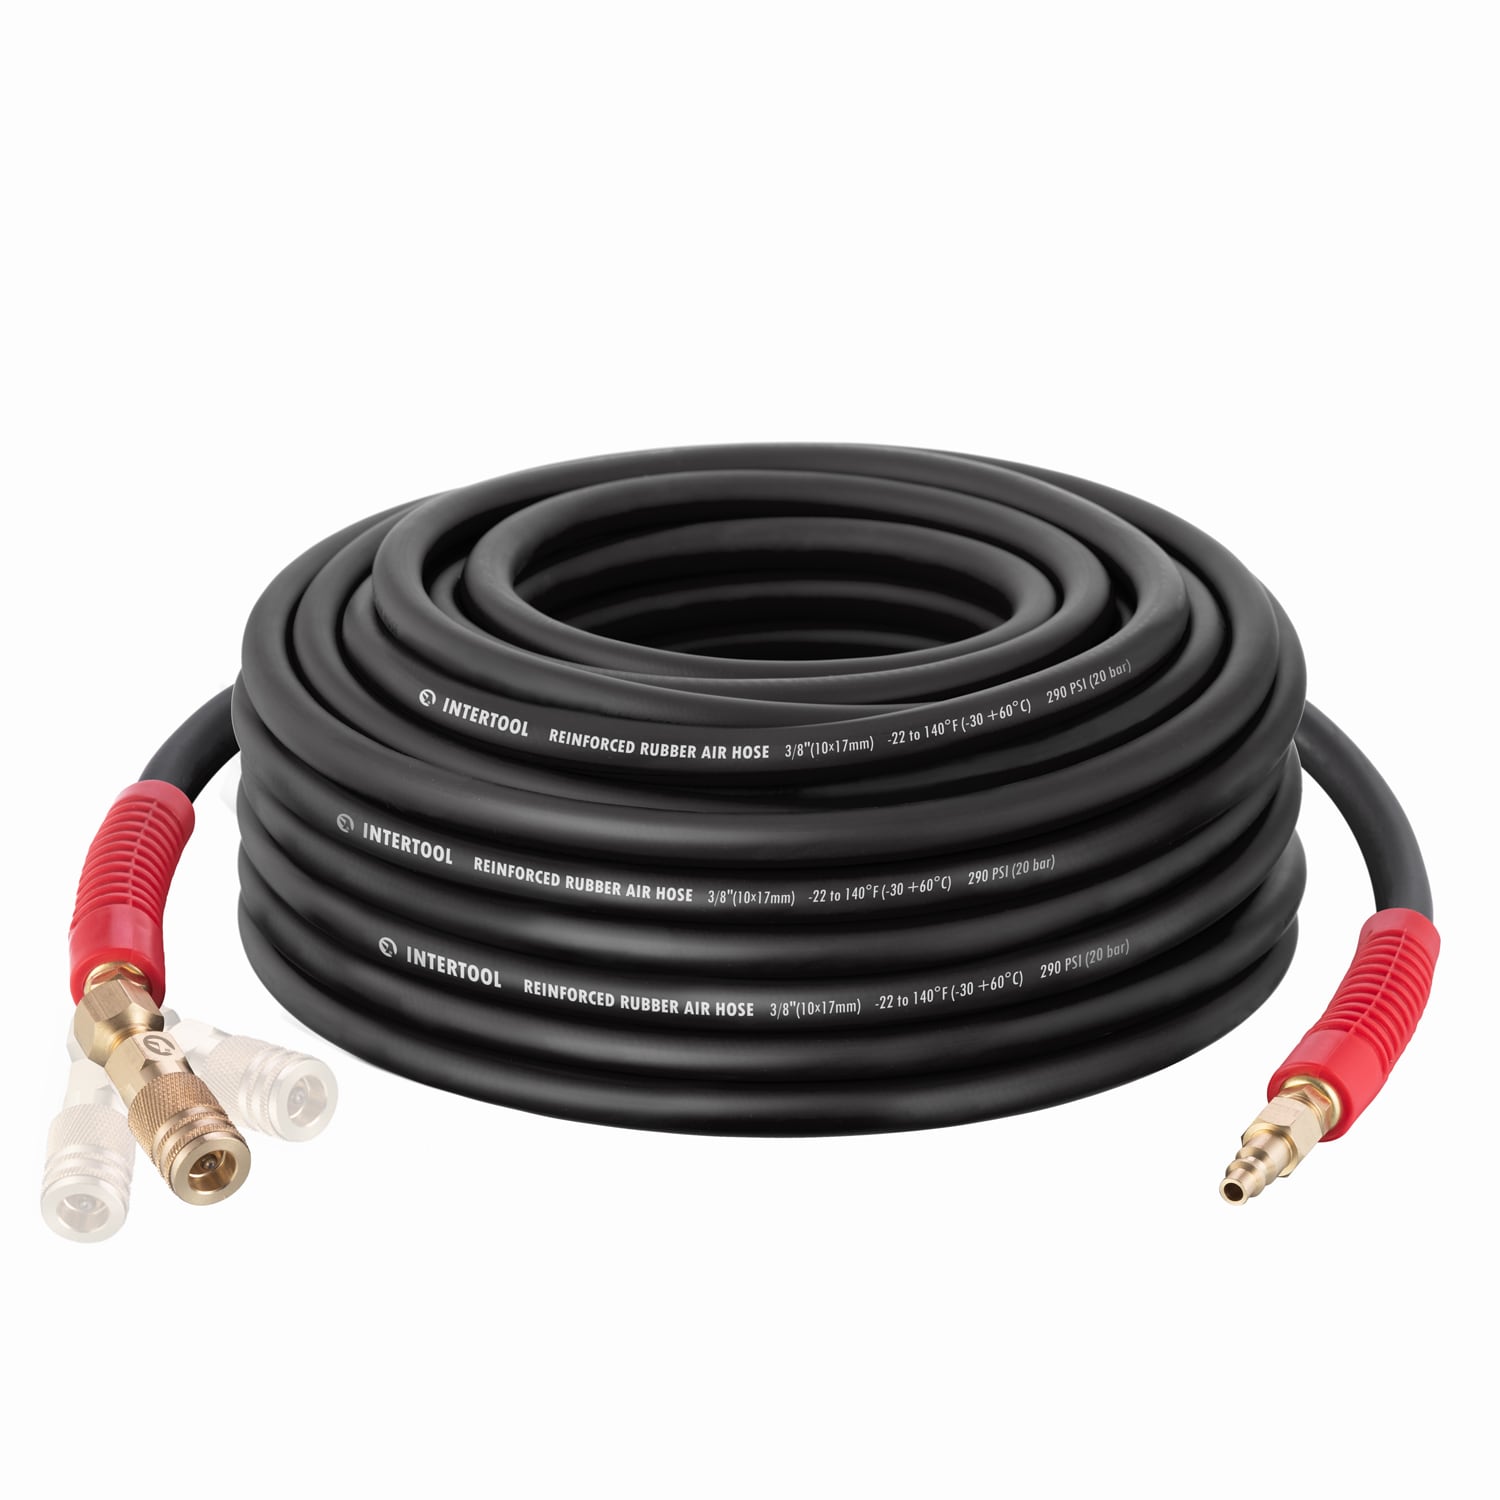 Kobalt 3/8-in x 100-ft Rubber Air Hose in the Air Compressor Hoses  department at